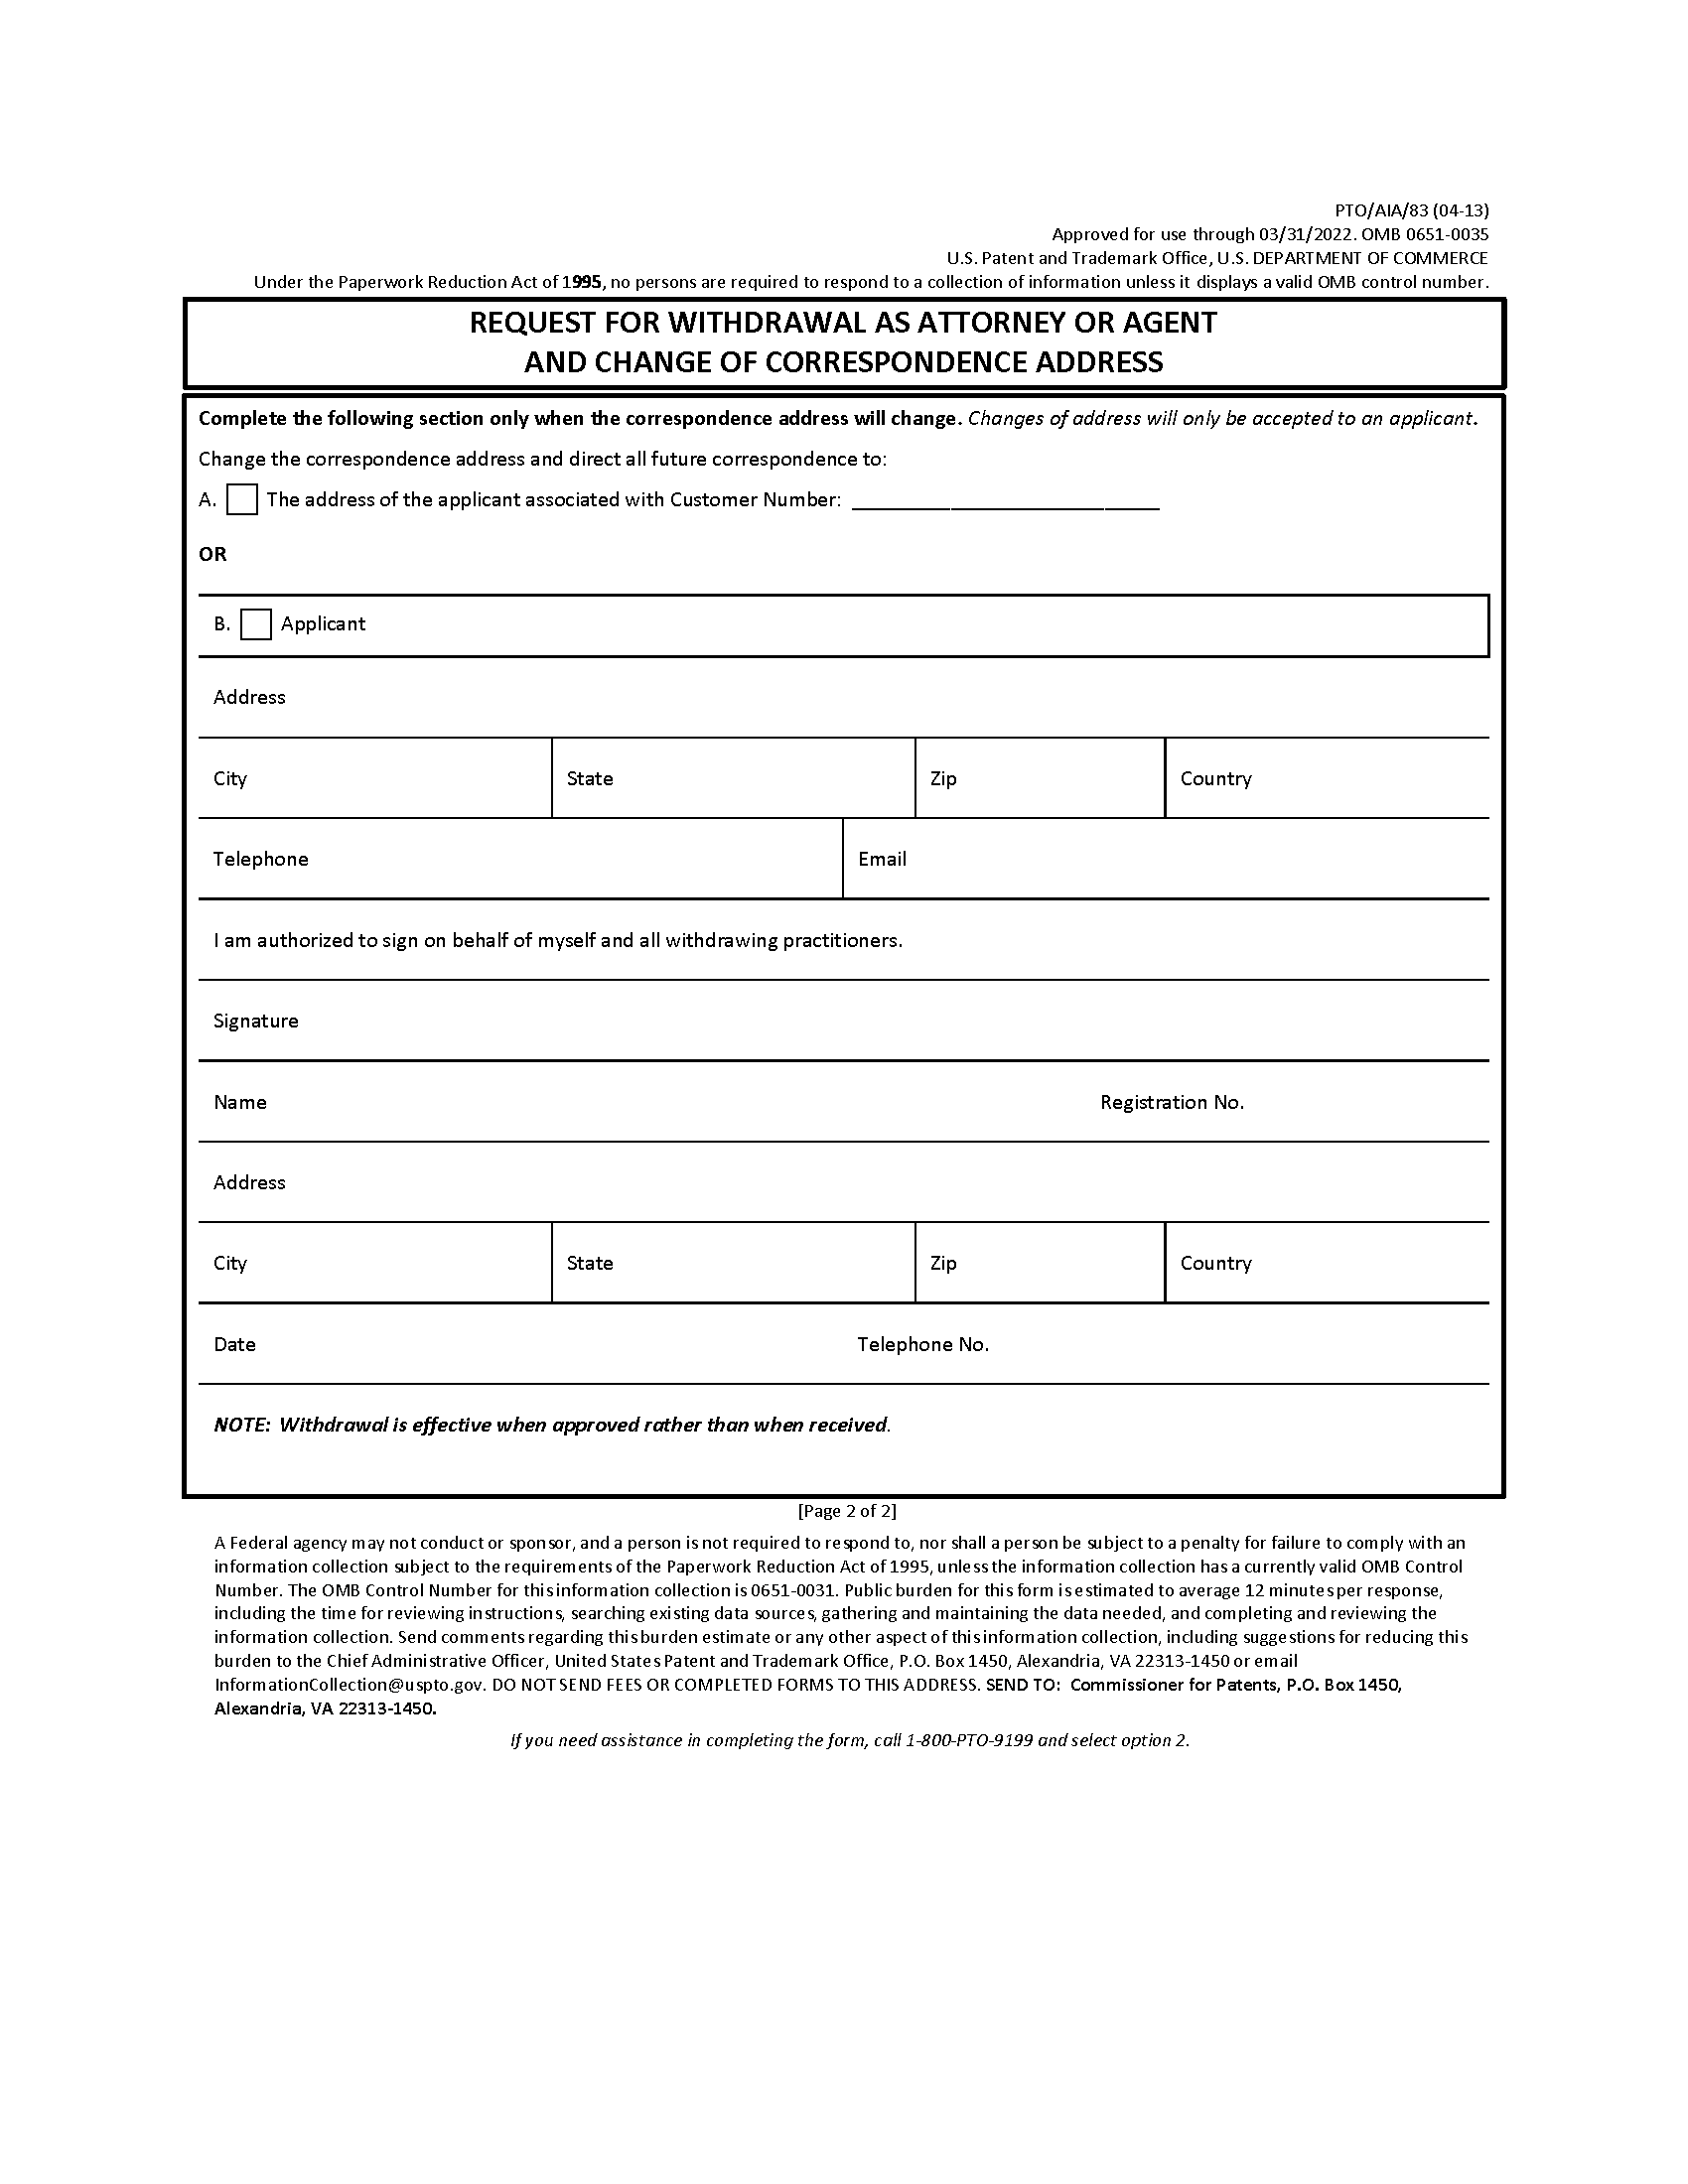 Form PTO/SB/83 Request for Withdrawl as Attorney or Agent And Chagne of Correspondence Address